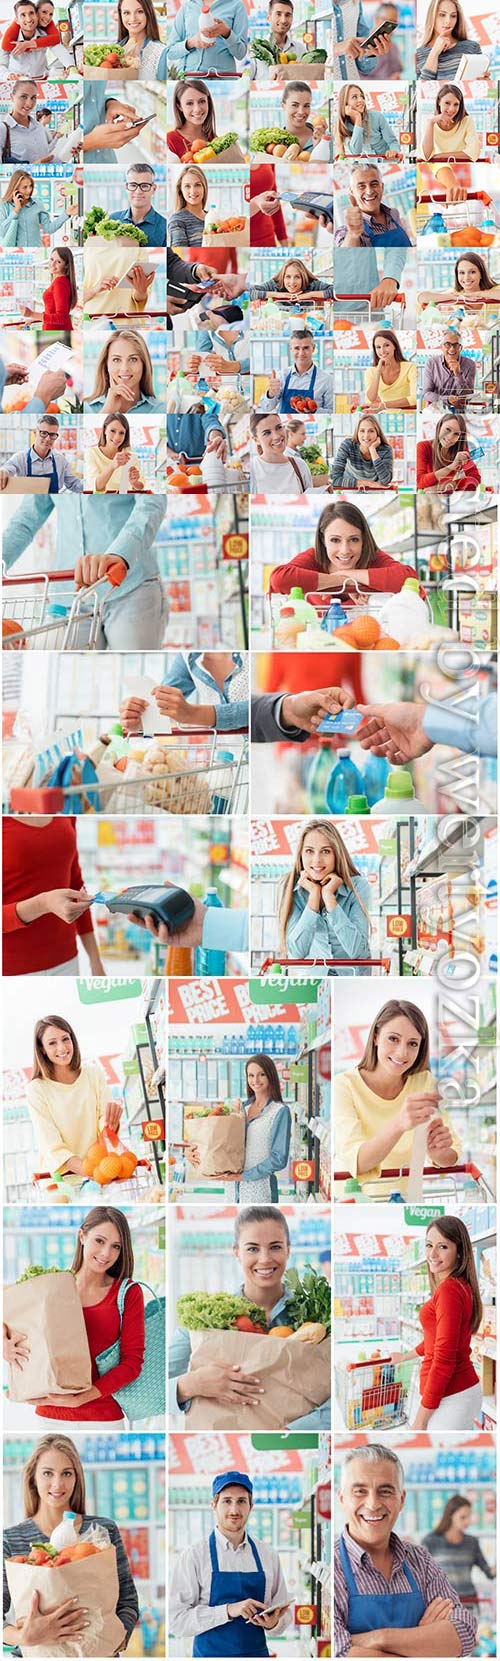 Men and women in super market shopping stock photo